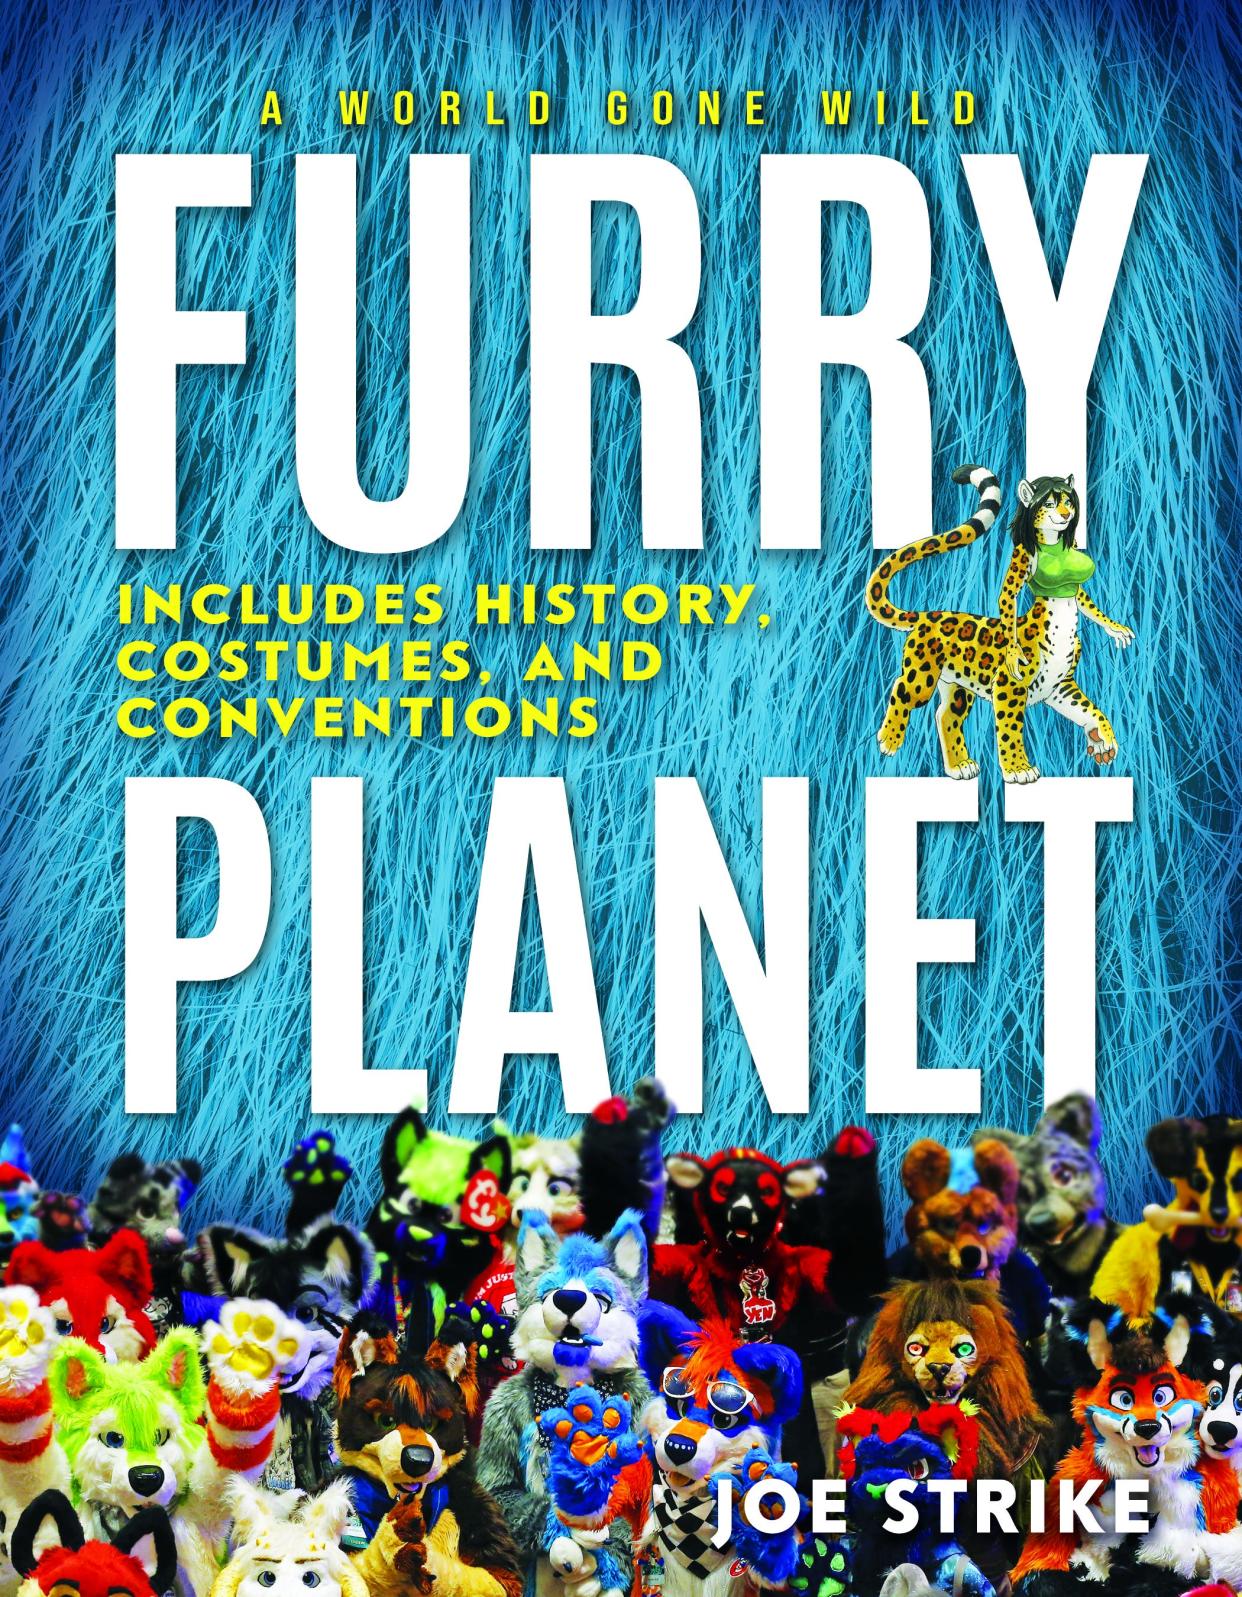 Joe Strike, a long-time furry and expert on the subculture, is the author of "Furry Planet: A World Gone Wild."